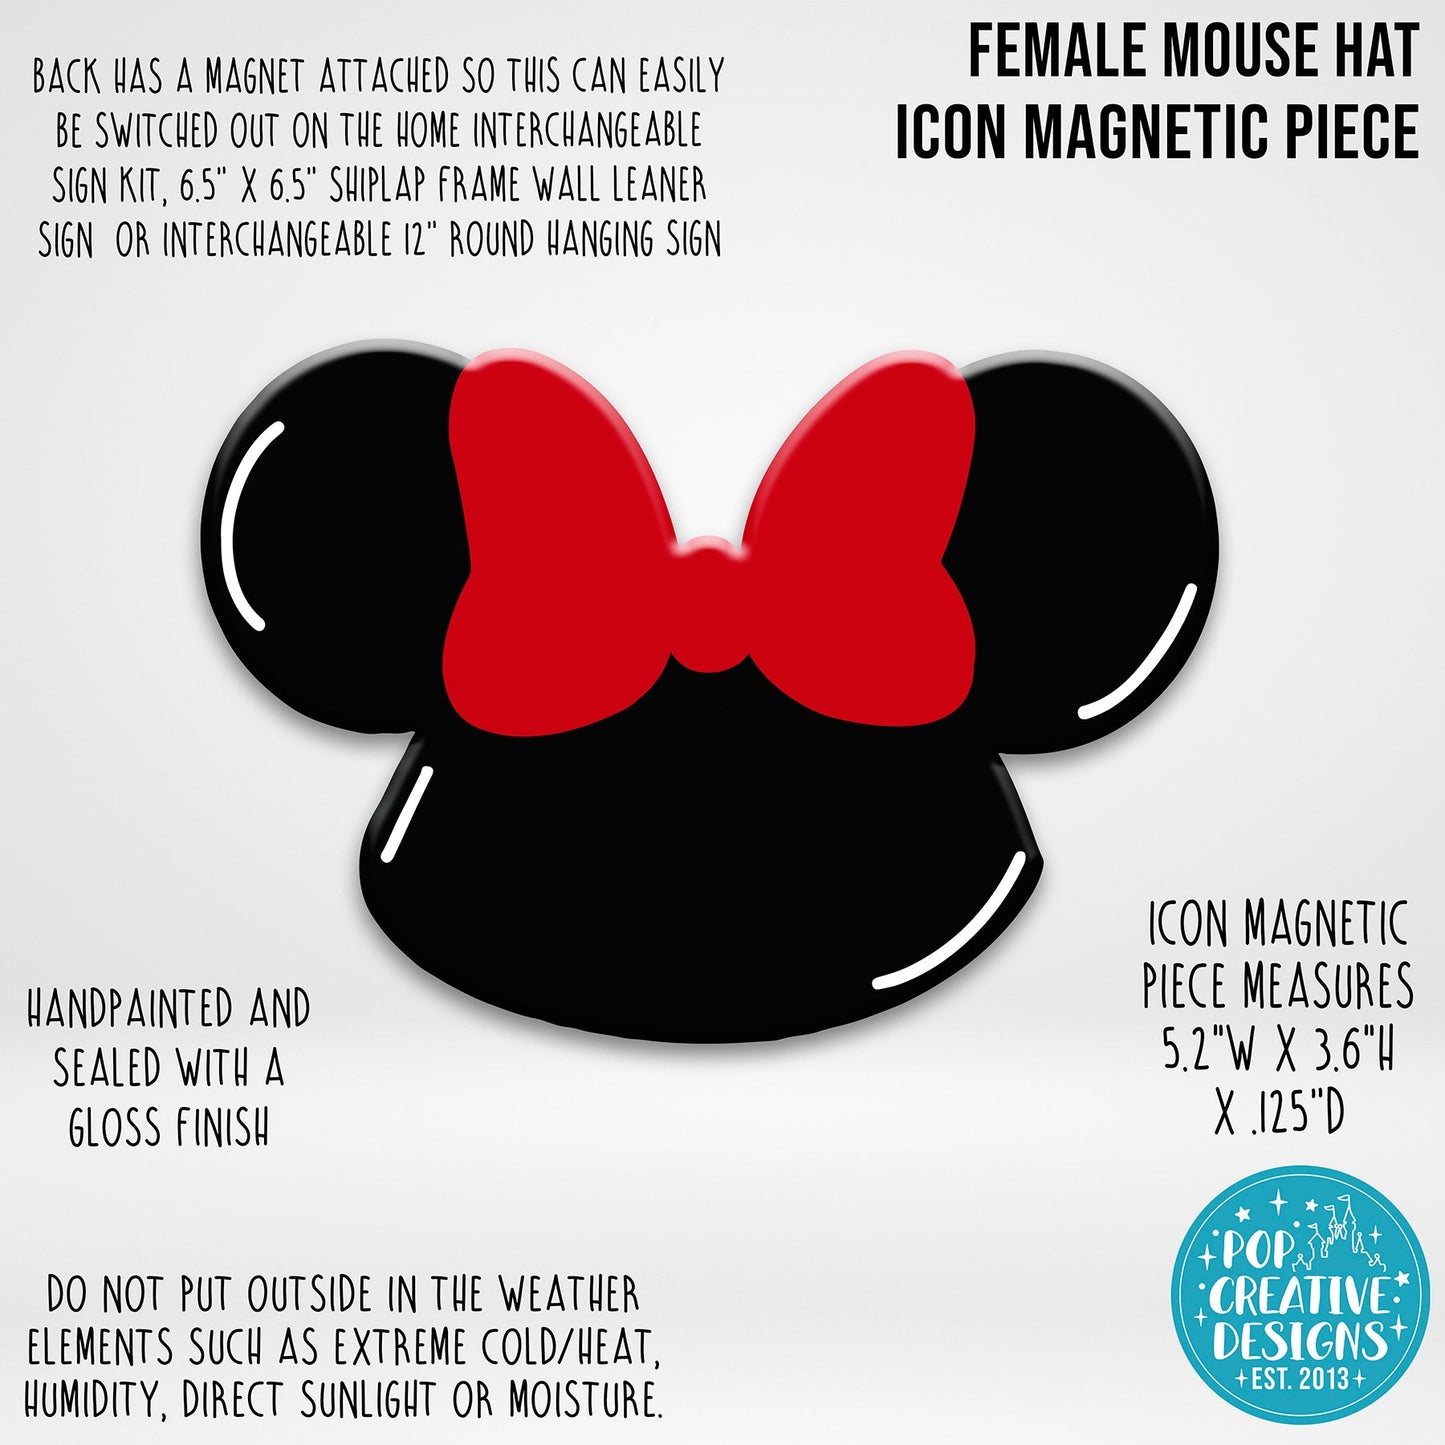 Female Mouse Hat Icon Magnetic Piece